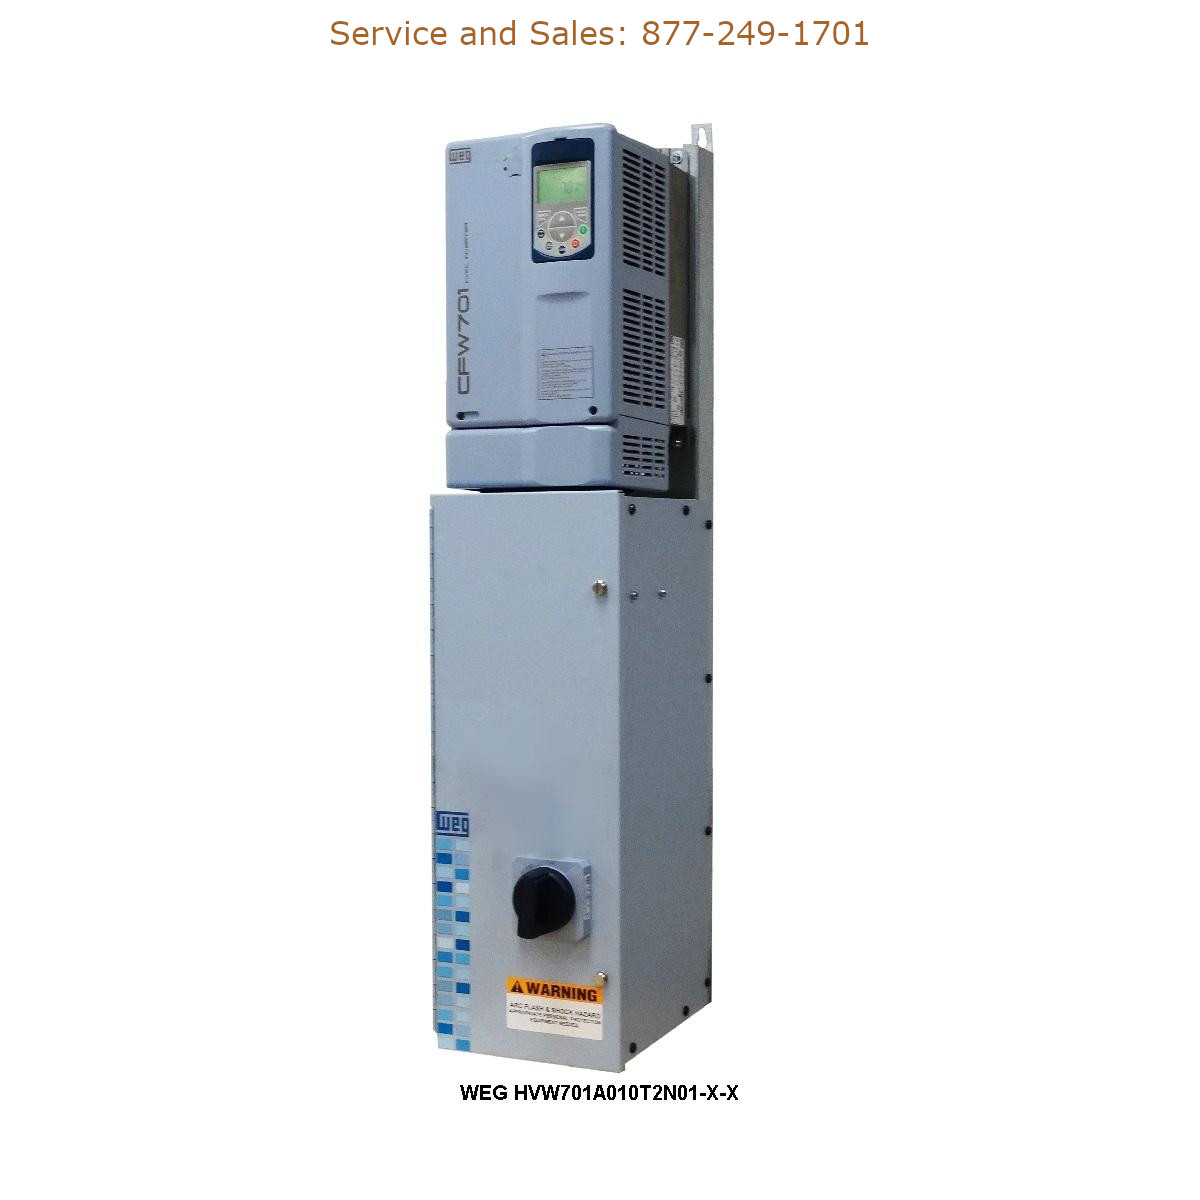 WEG HVW701A010T2N01-X-X WEG Model Number HVW701A010T2N01-X-X WEG Drives, Variable Speed Drives Repair Service, Troubleshooting, Replacement Parts https://gesrepair.com/wp-content/uploads/2022/WEG/WEG_HVW701A010T2N01-X-X_Drives_Variable_Speed_Drives.jpg